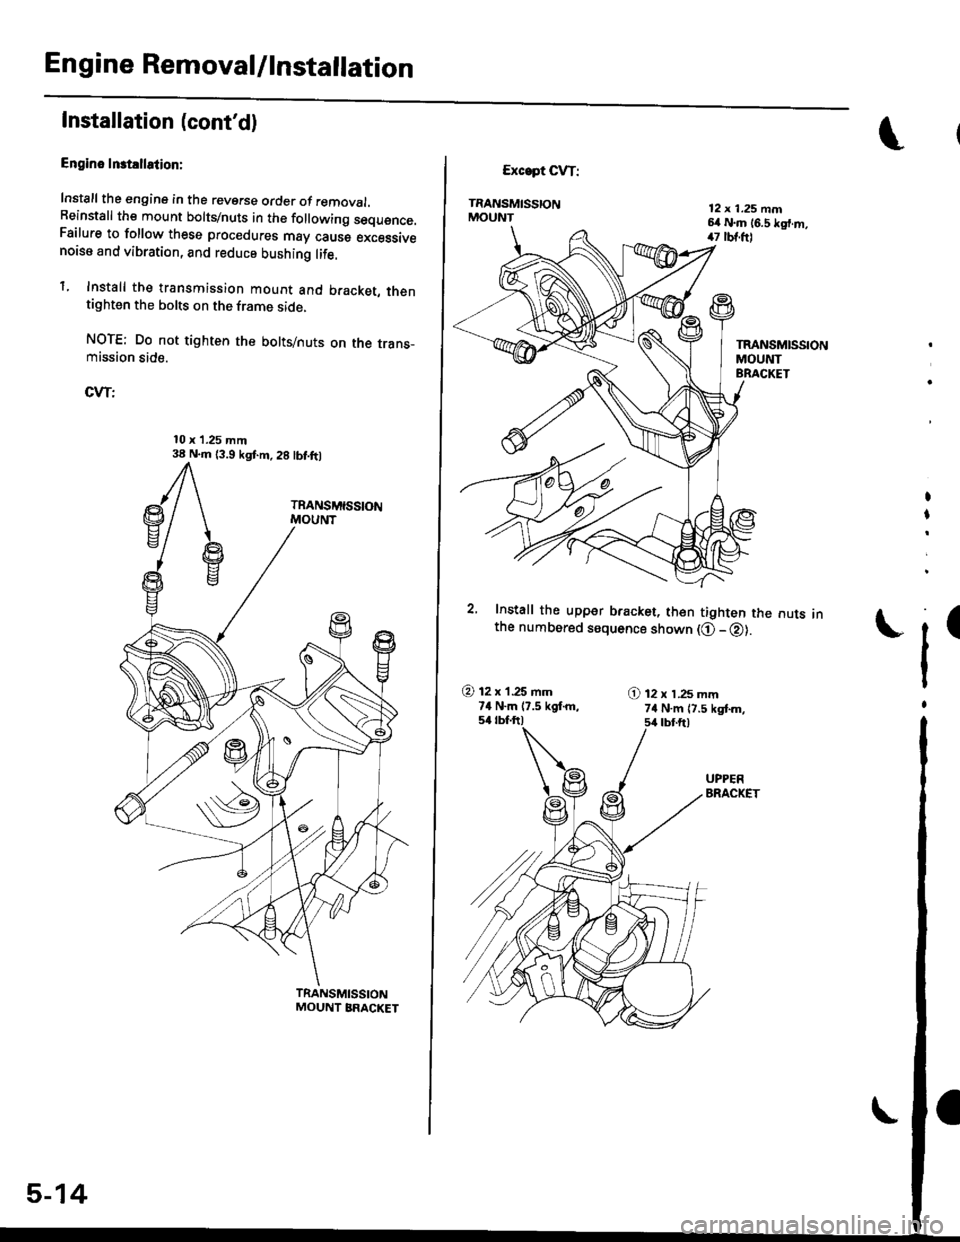 HONDA CIVIC 2000 6.G Workshop Manual Engine Removal/lnstallation
Installation (contd)
Engino Inst!llation:
Install the engine in the reverse order of removal.Beinstall the mount bolts/nuts in the following sequence.Failure to follow the